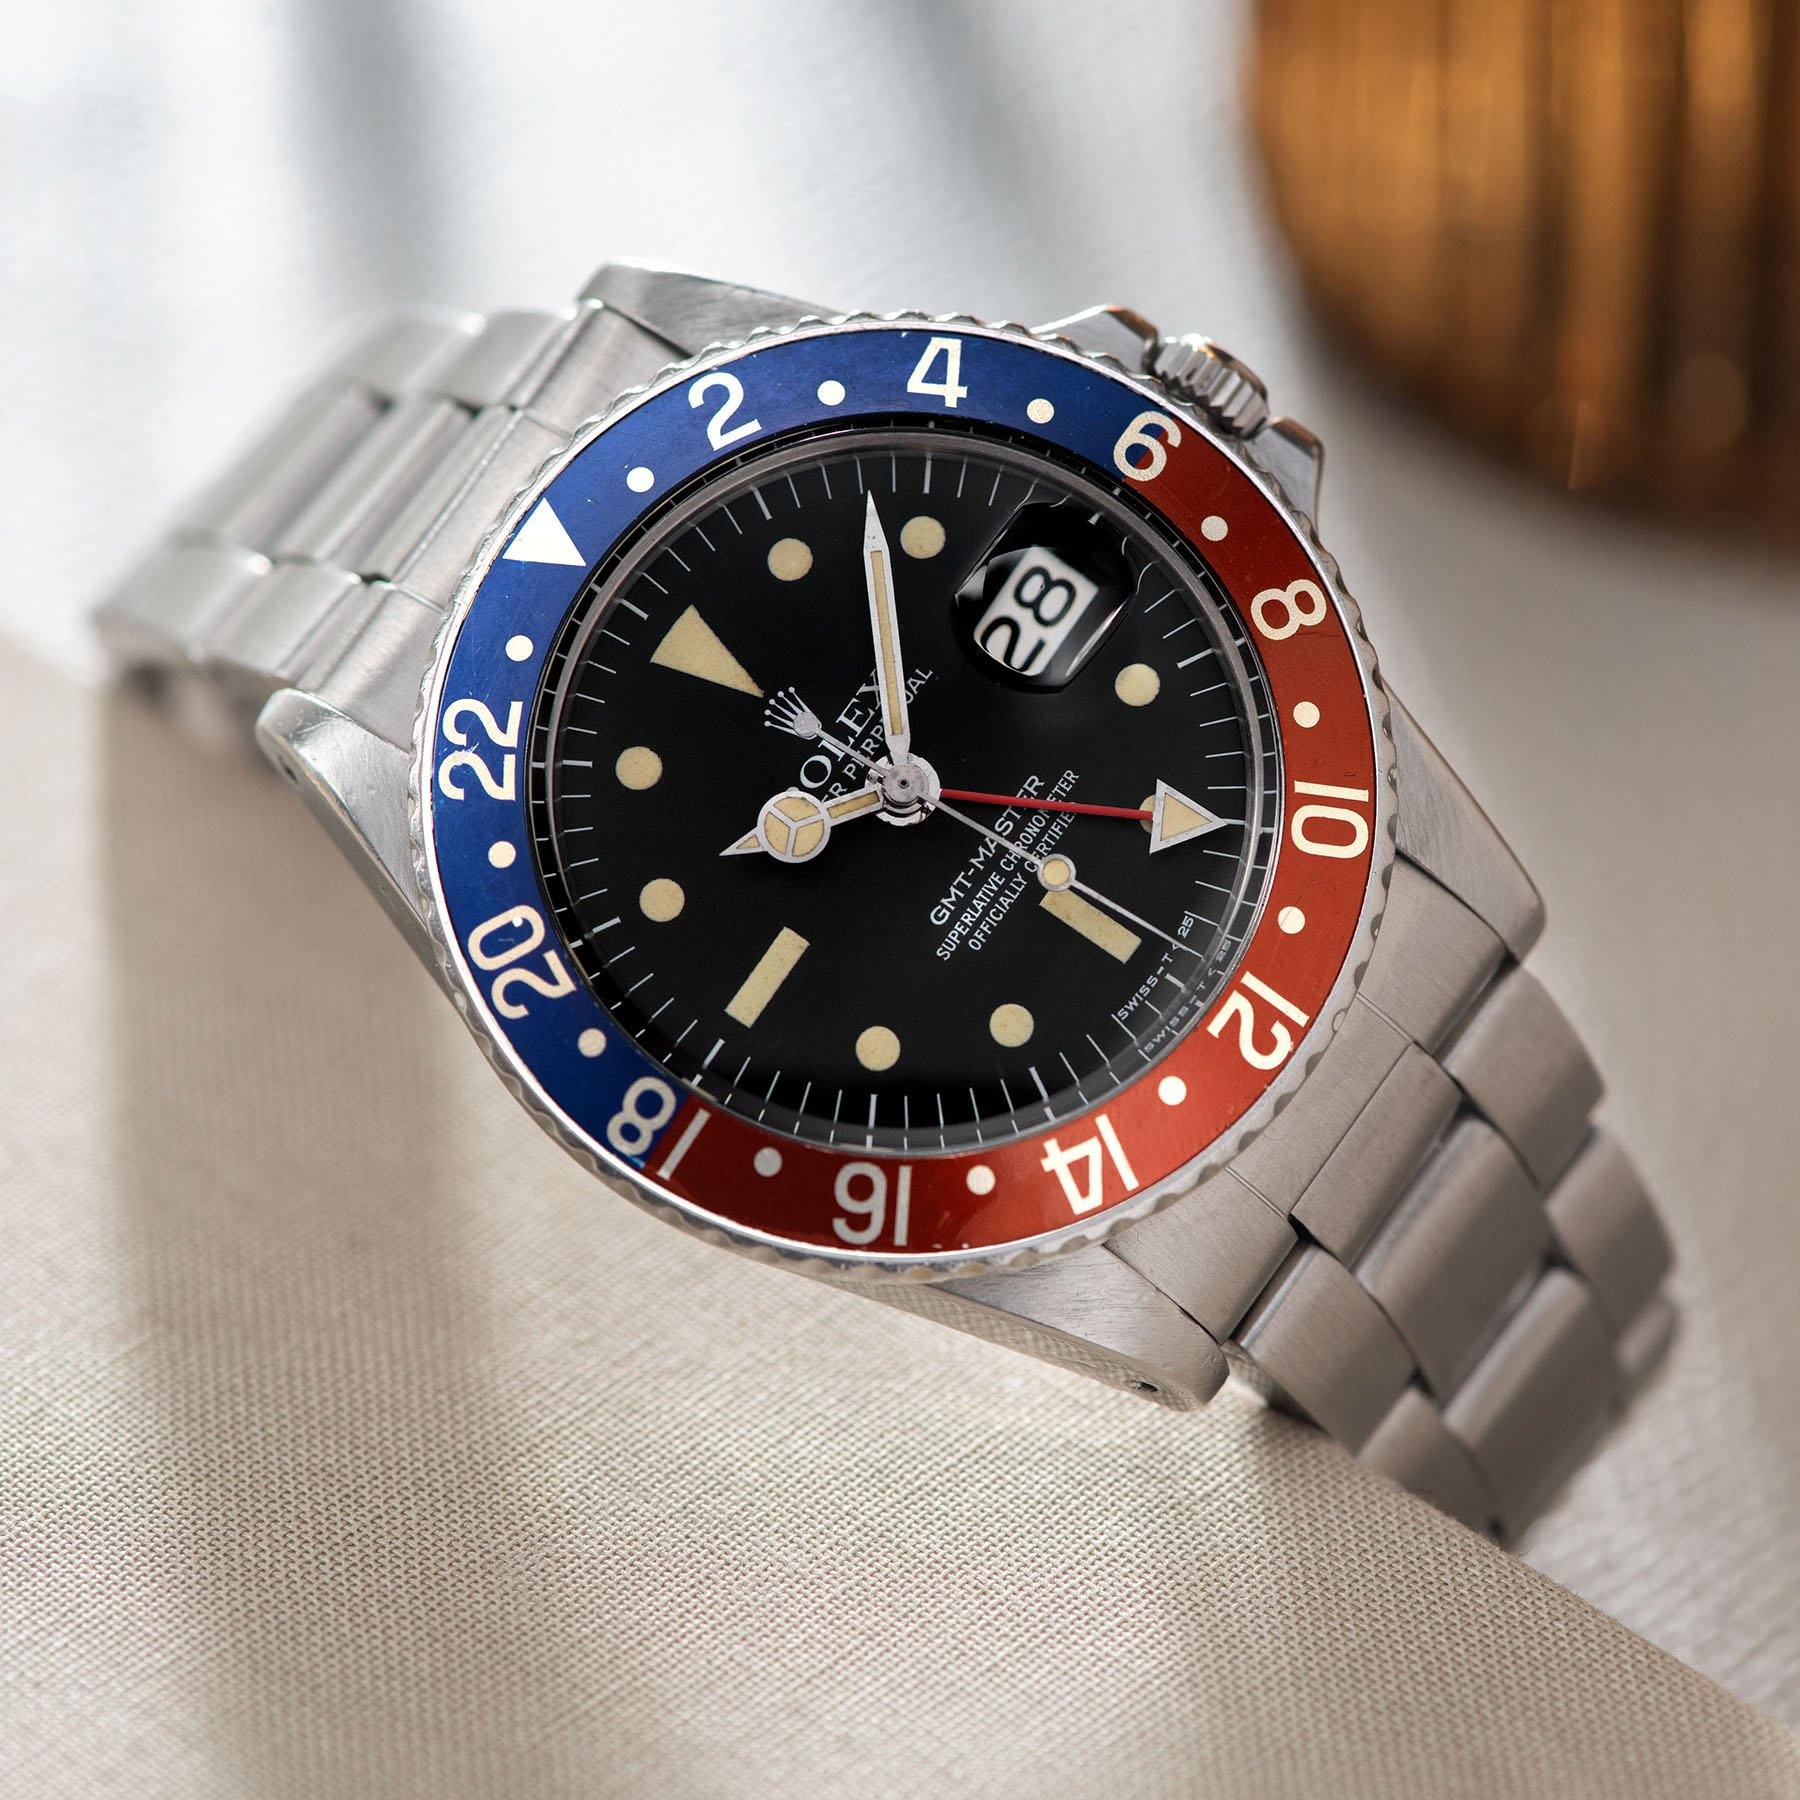 Rolex 1675 Mk3 Radial Dial GMT Master Crisp red-back ‘Pepsi’ inlay